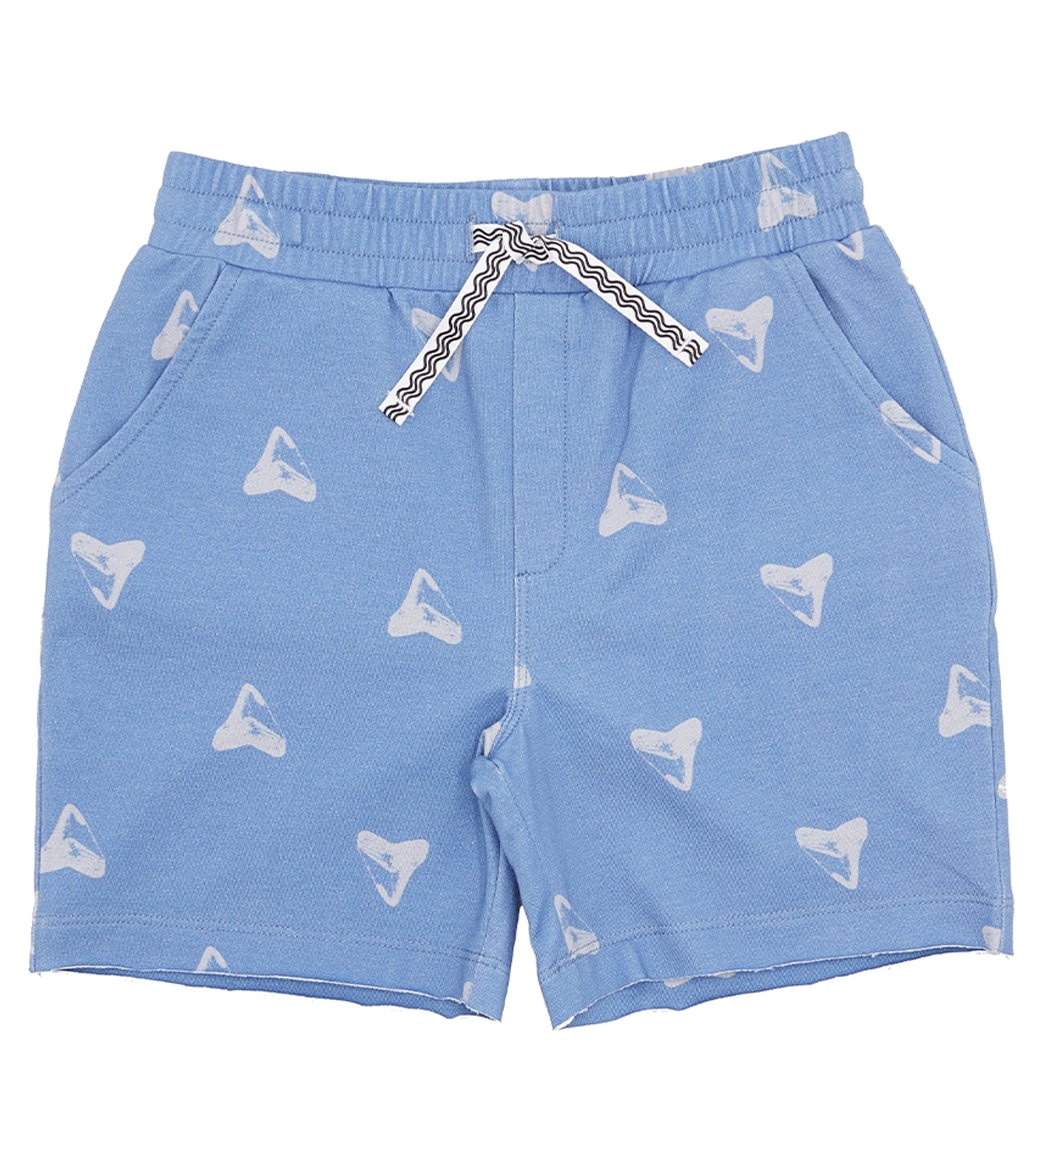 Feather 4 Arrow Boys' Low Tide Shorts Baby Toddler/Little/Big Kid - Washed Indigo 10 Cotton - Swimoutlet.com